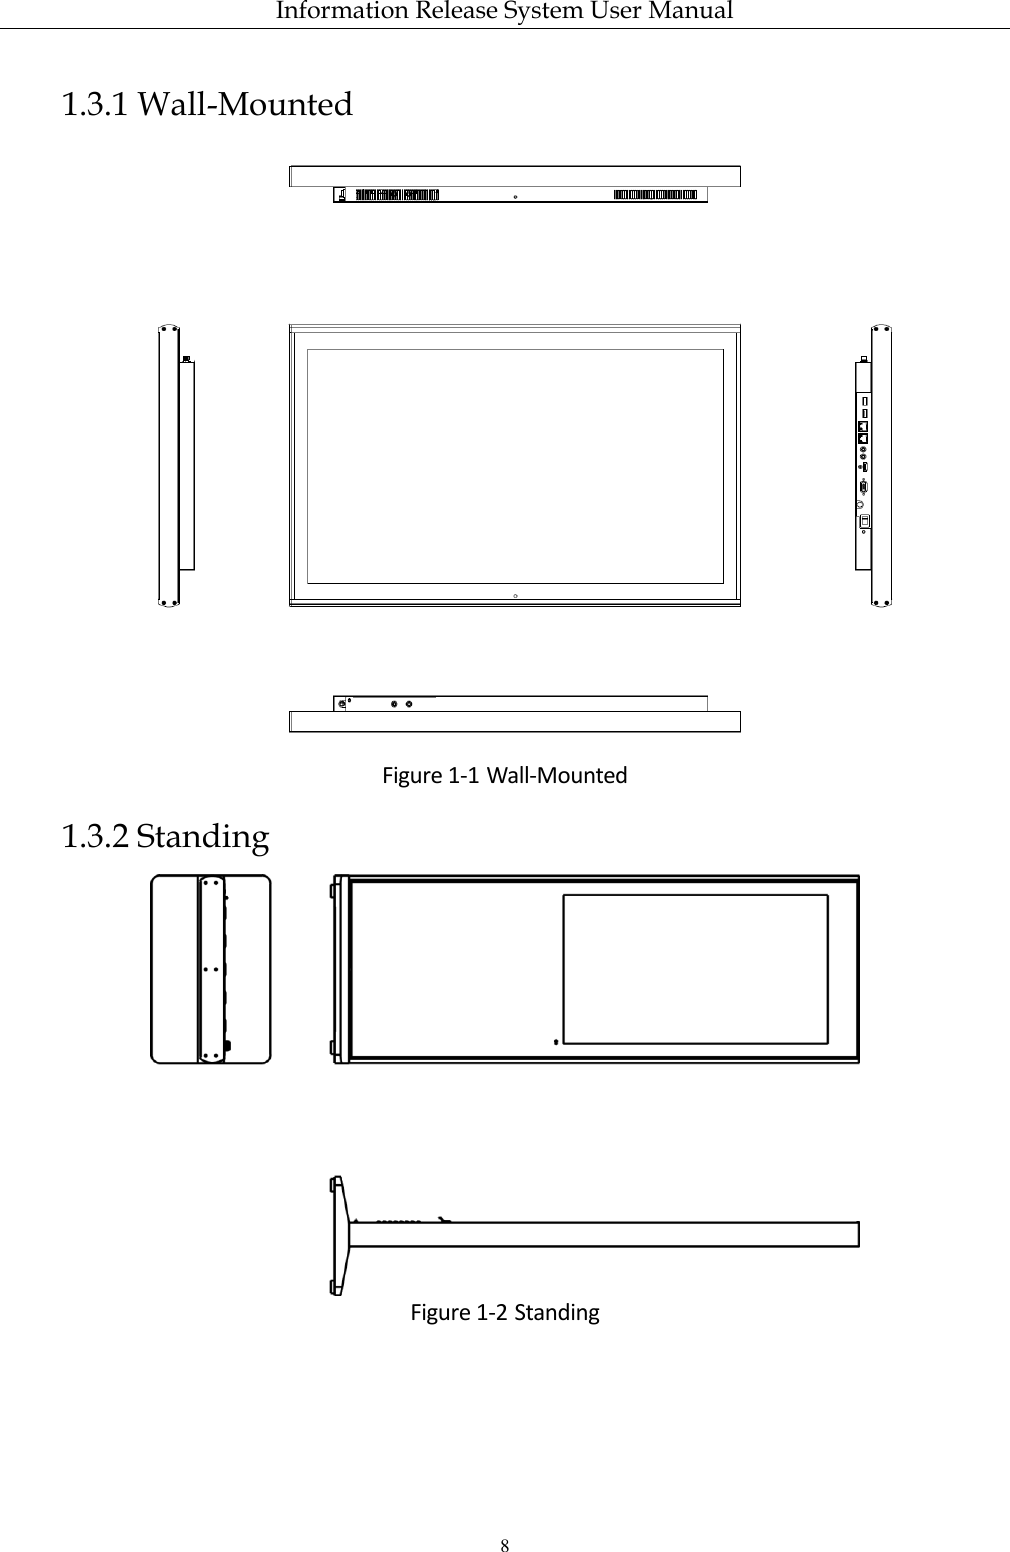 Information Release System User Manual 8 1.3.1 Wall-Mounted  Figure 1-1 Wall-Mounted 1.3.2 Standing  Figure 1-2 Standing 